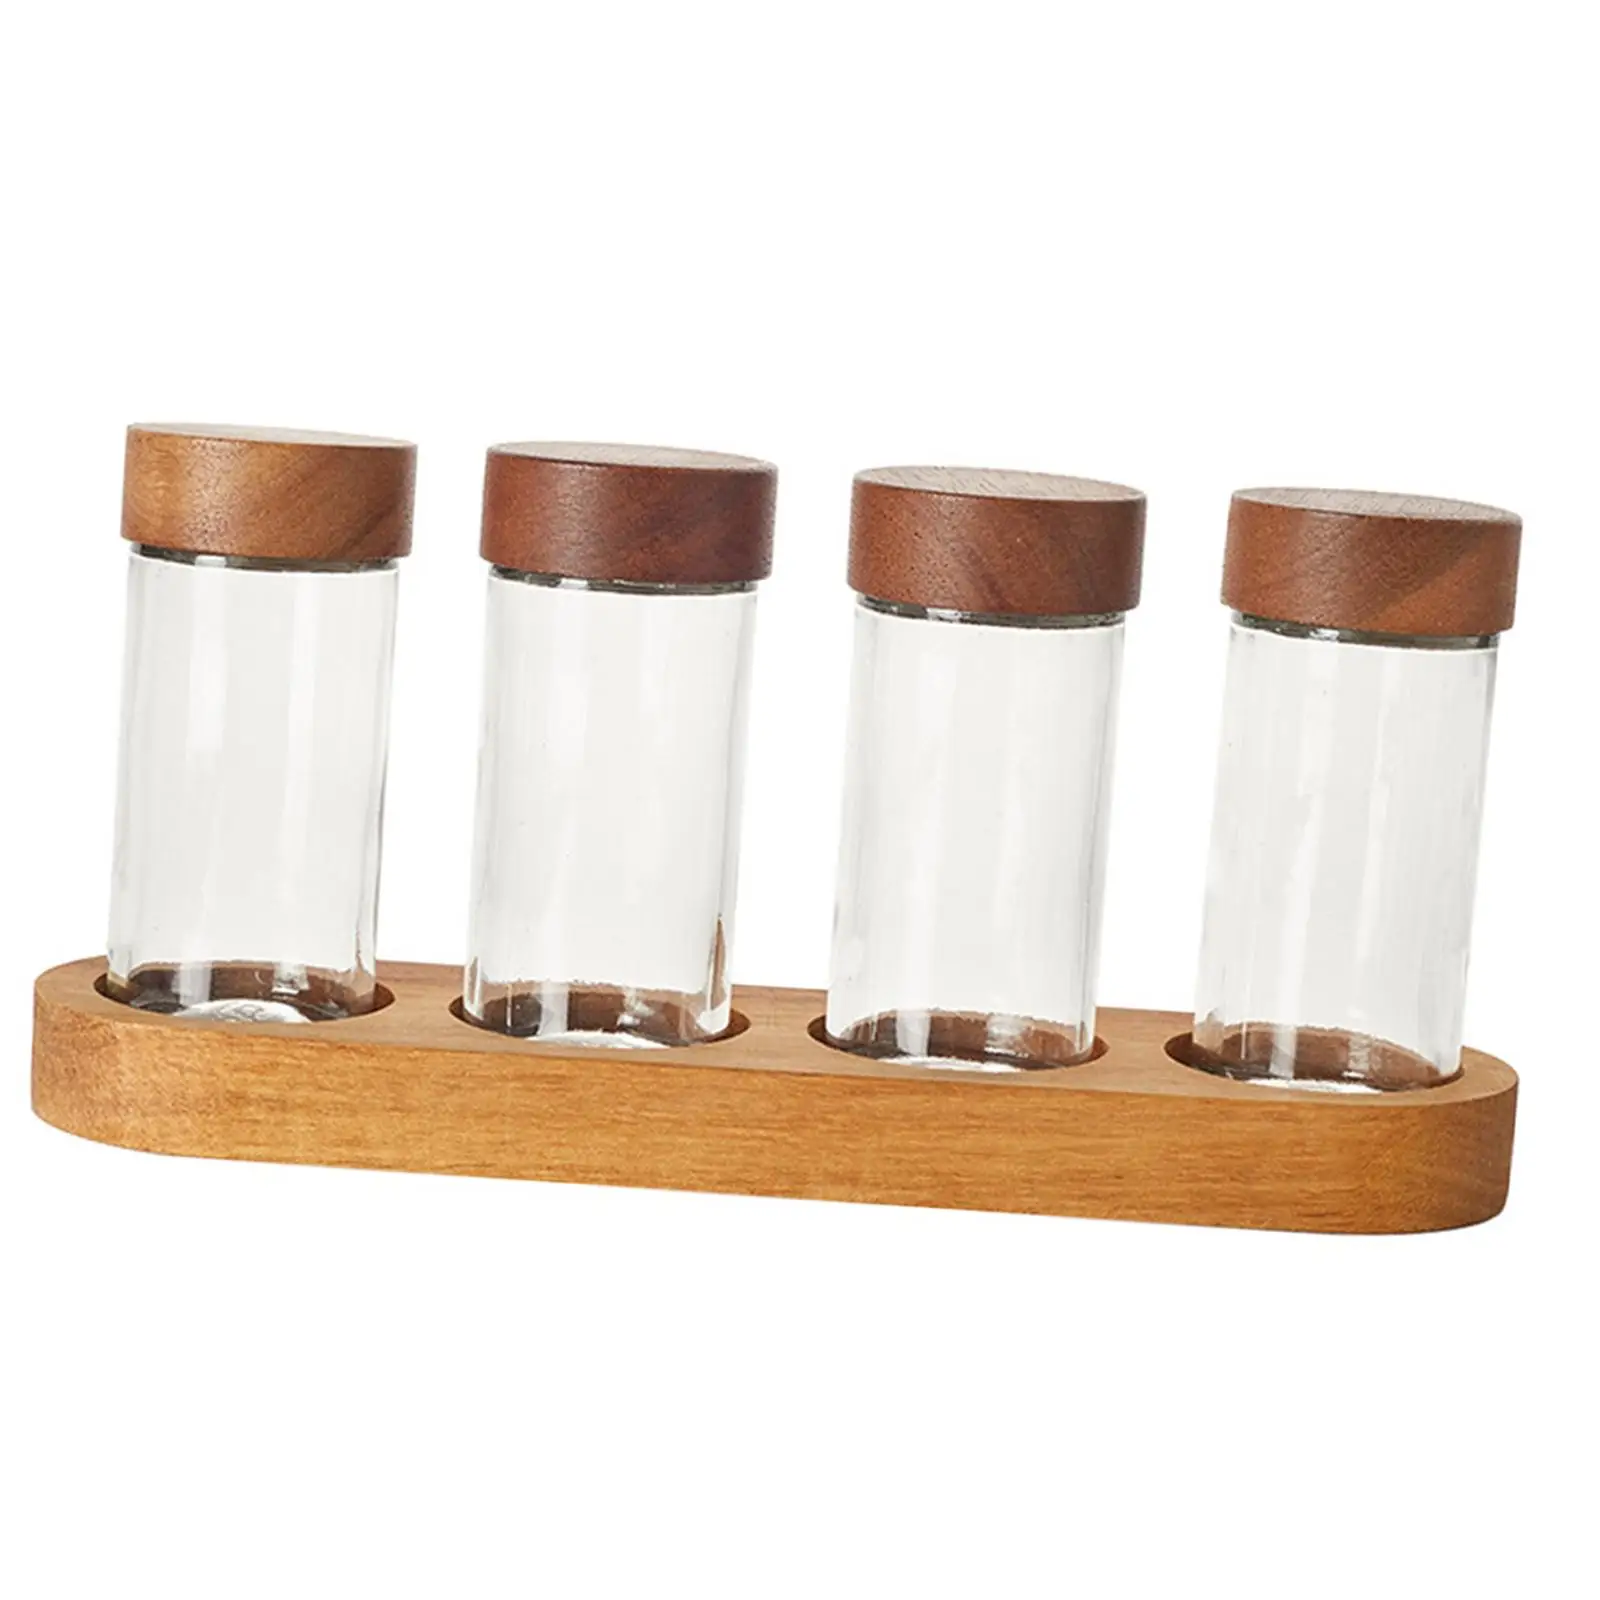 4x Condiment Jars Set Multipurpose with Lid and Tray Sugar Bowl Glass Spice Jars for Tea Pepper Coffee Beans Nuts Spice